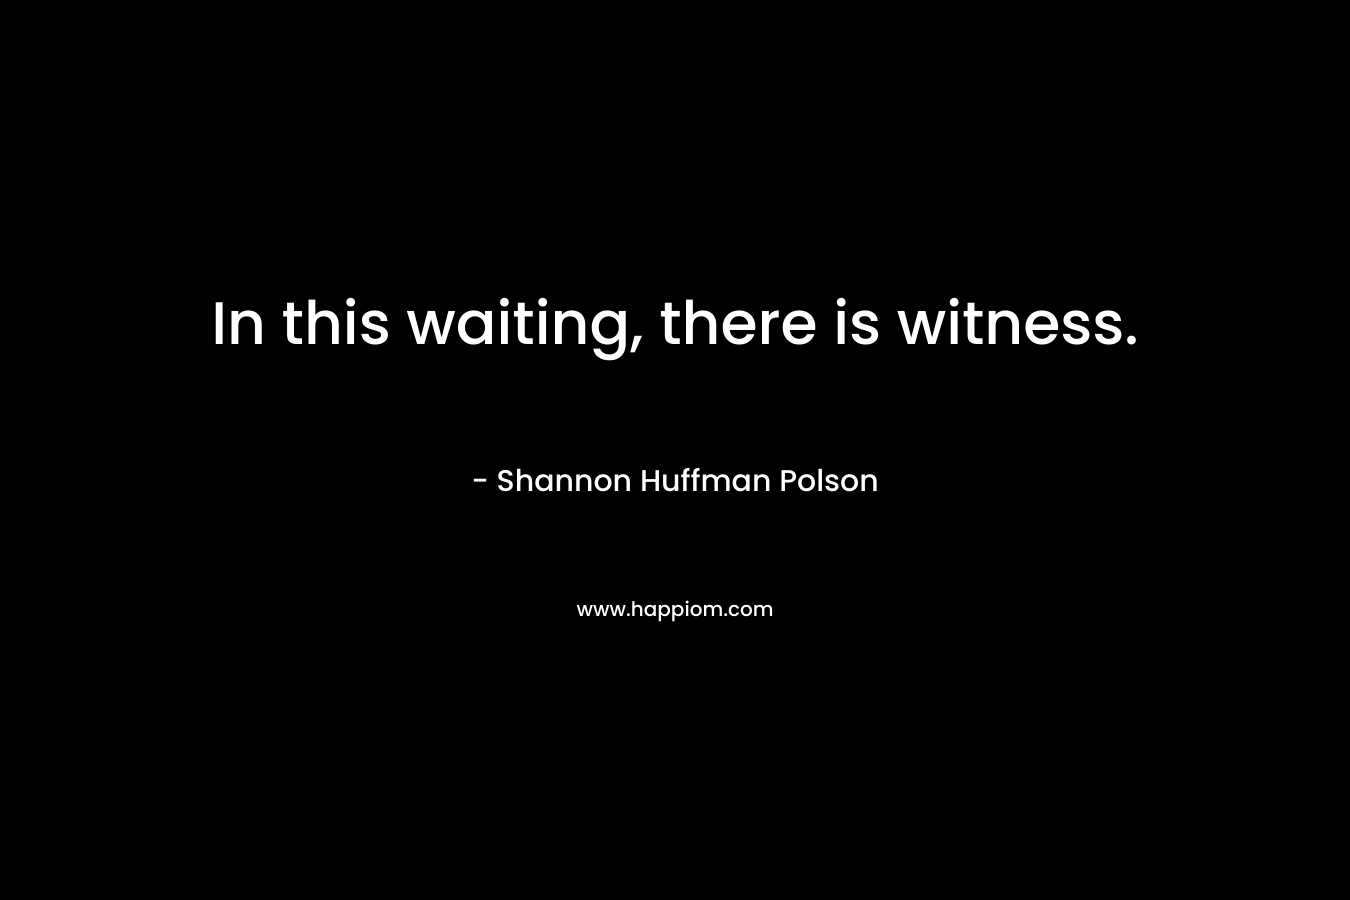 In this waiting, there is witness.